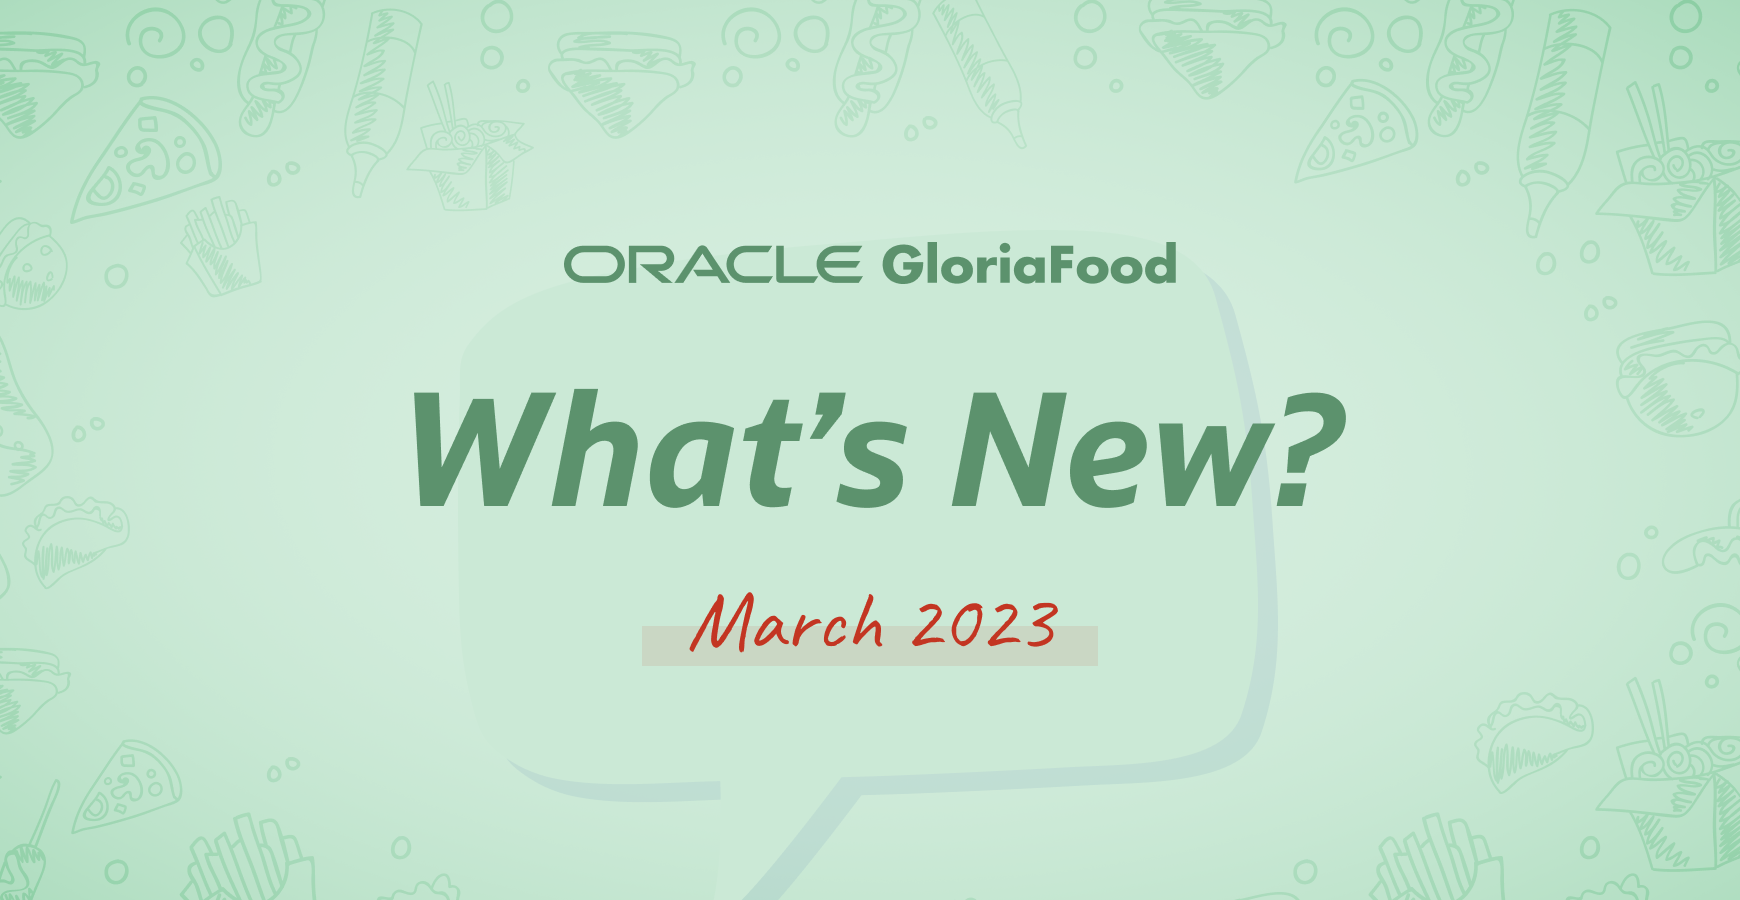 What's New with GloriaFood Roundup: March 2023